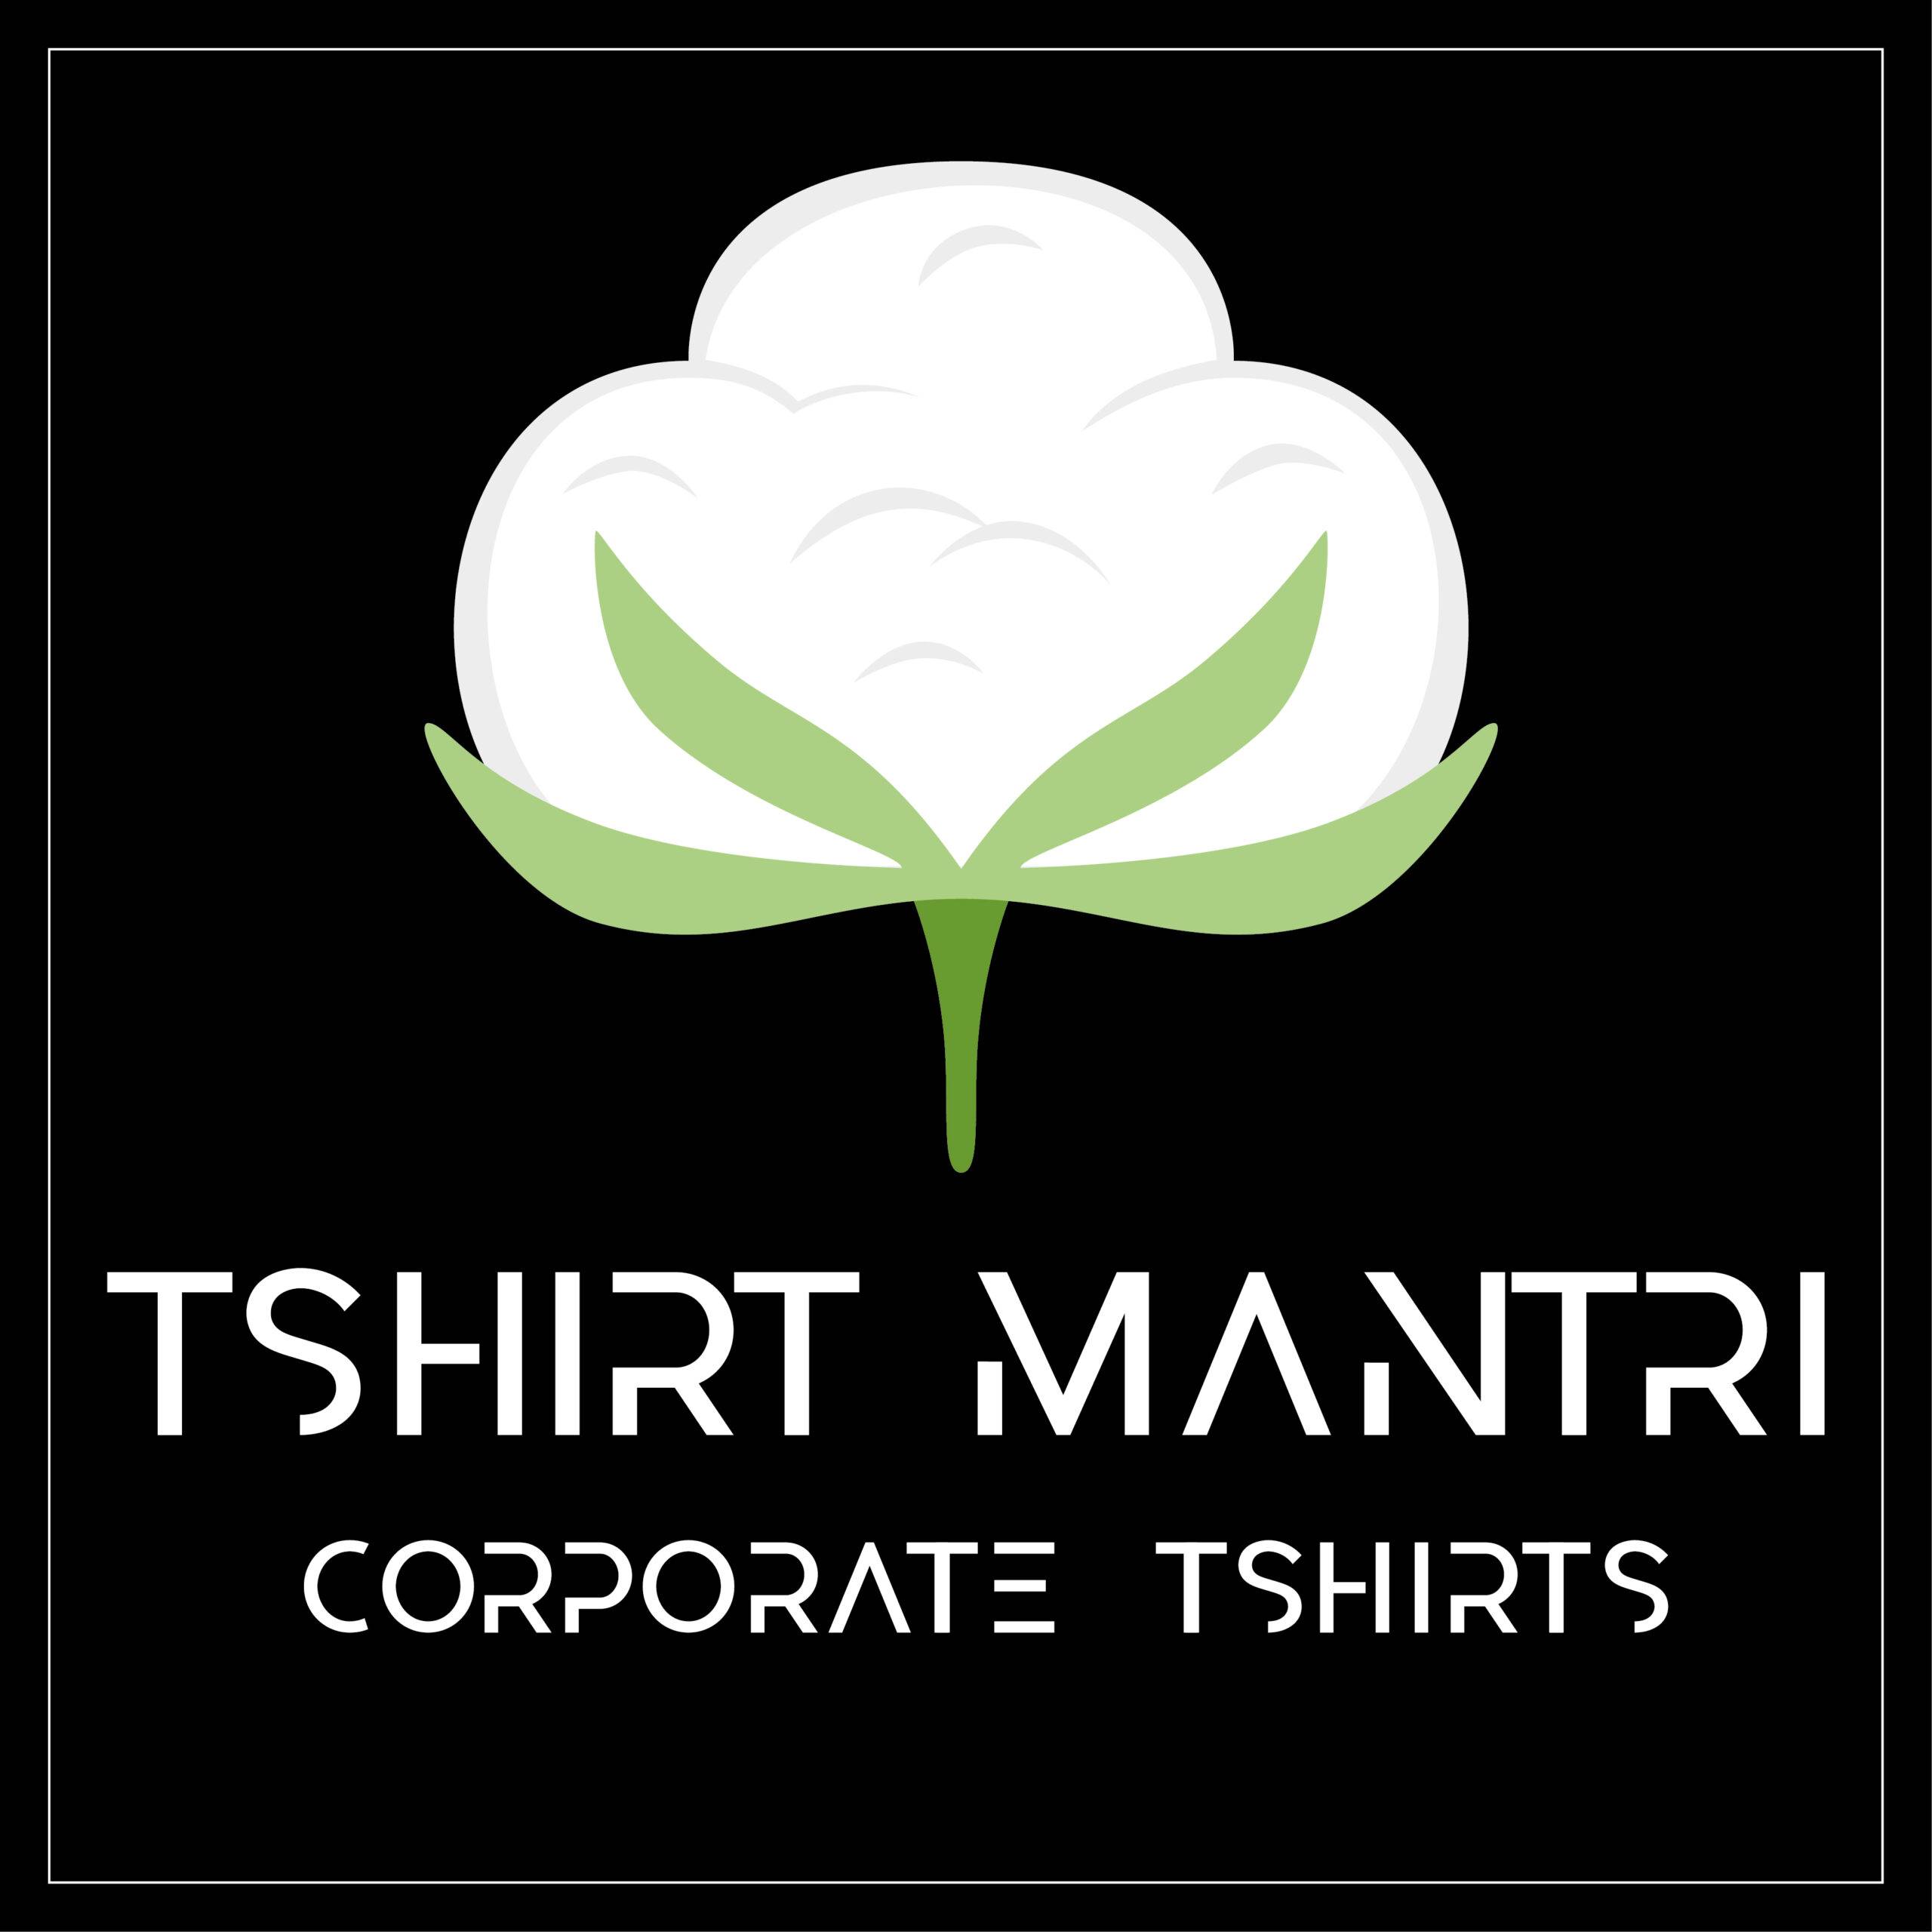 corporate and promotional t-shirt manufacturer in india – promind garments